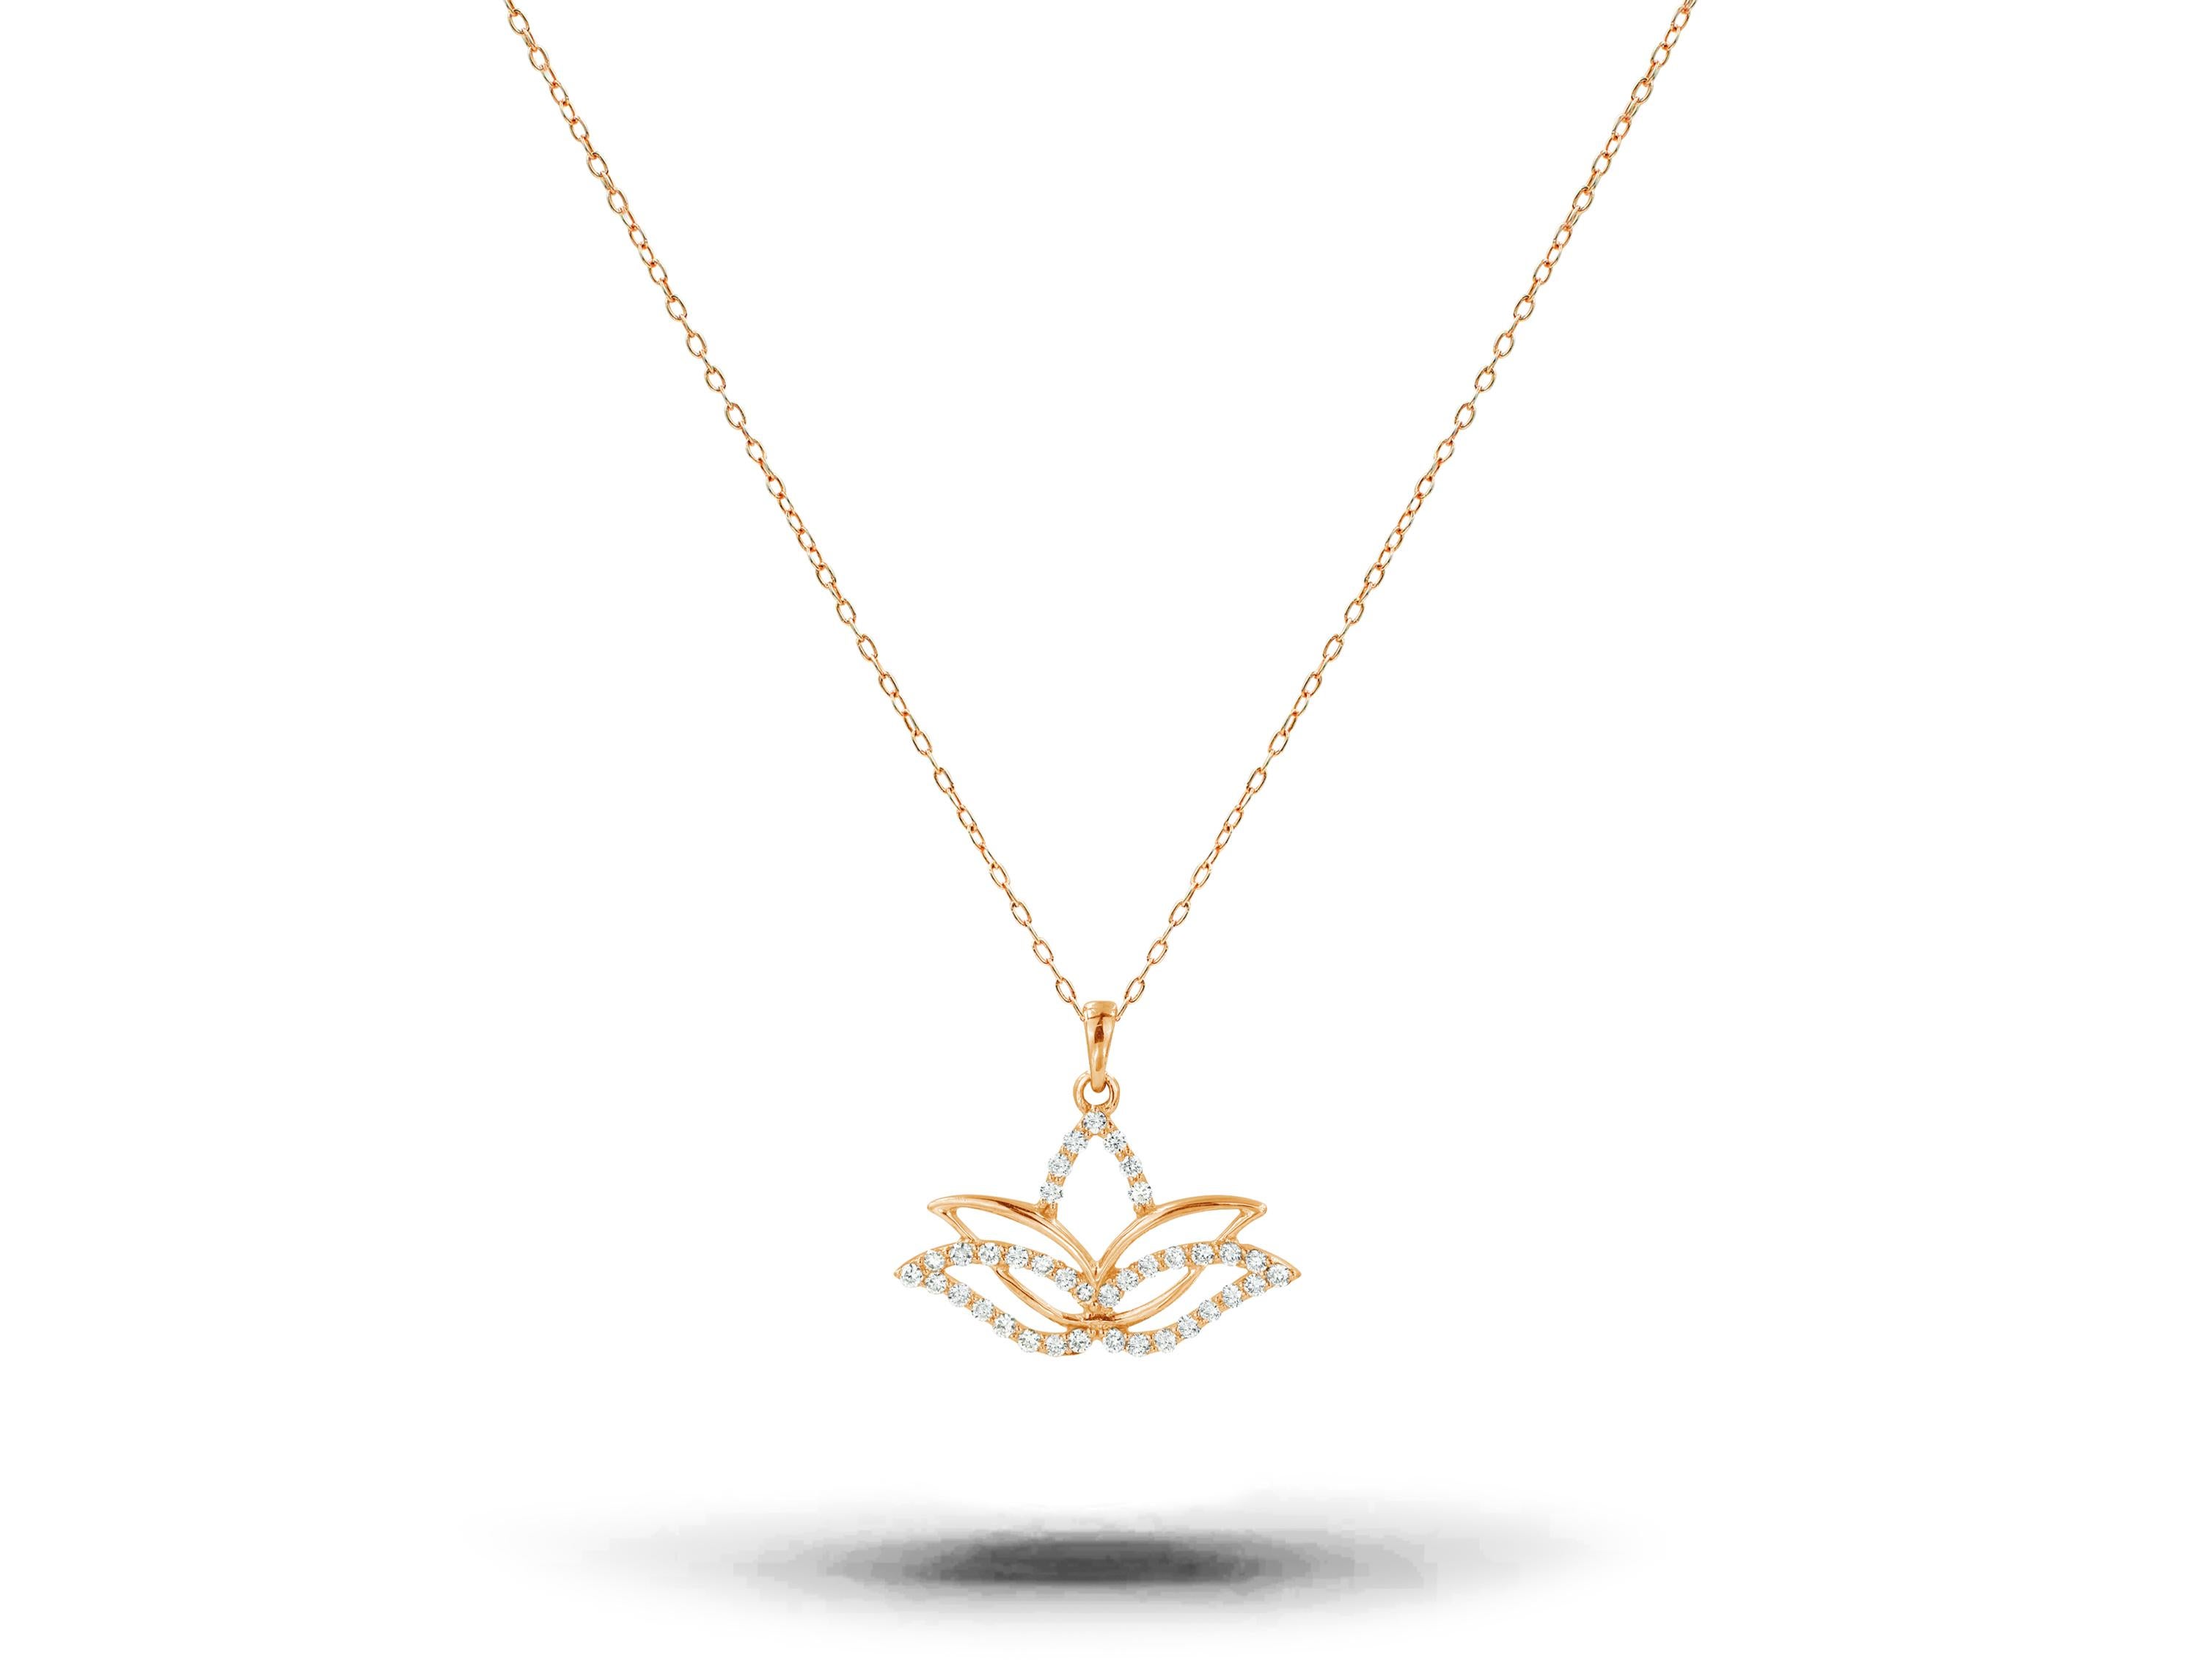 Diamond Lotus Flower Necklace is made of 18k solid gold available in three colors of gold, White Gold / Rose Gold / Yellow Gold.

Lightweight and gorgeous natural genuine diamond. Each diamond is hand selected by me to ensure quality and set by a